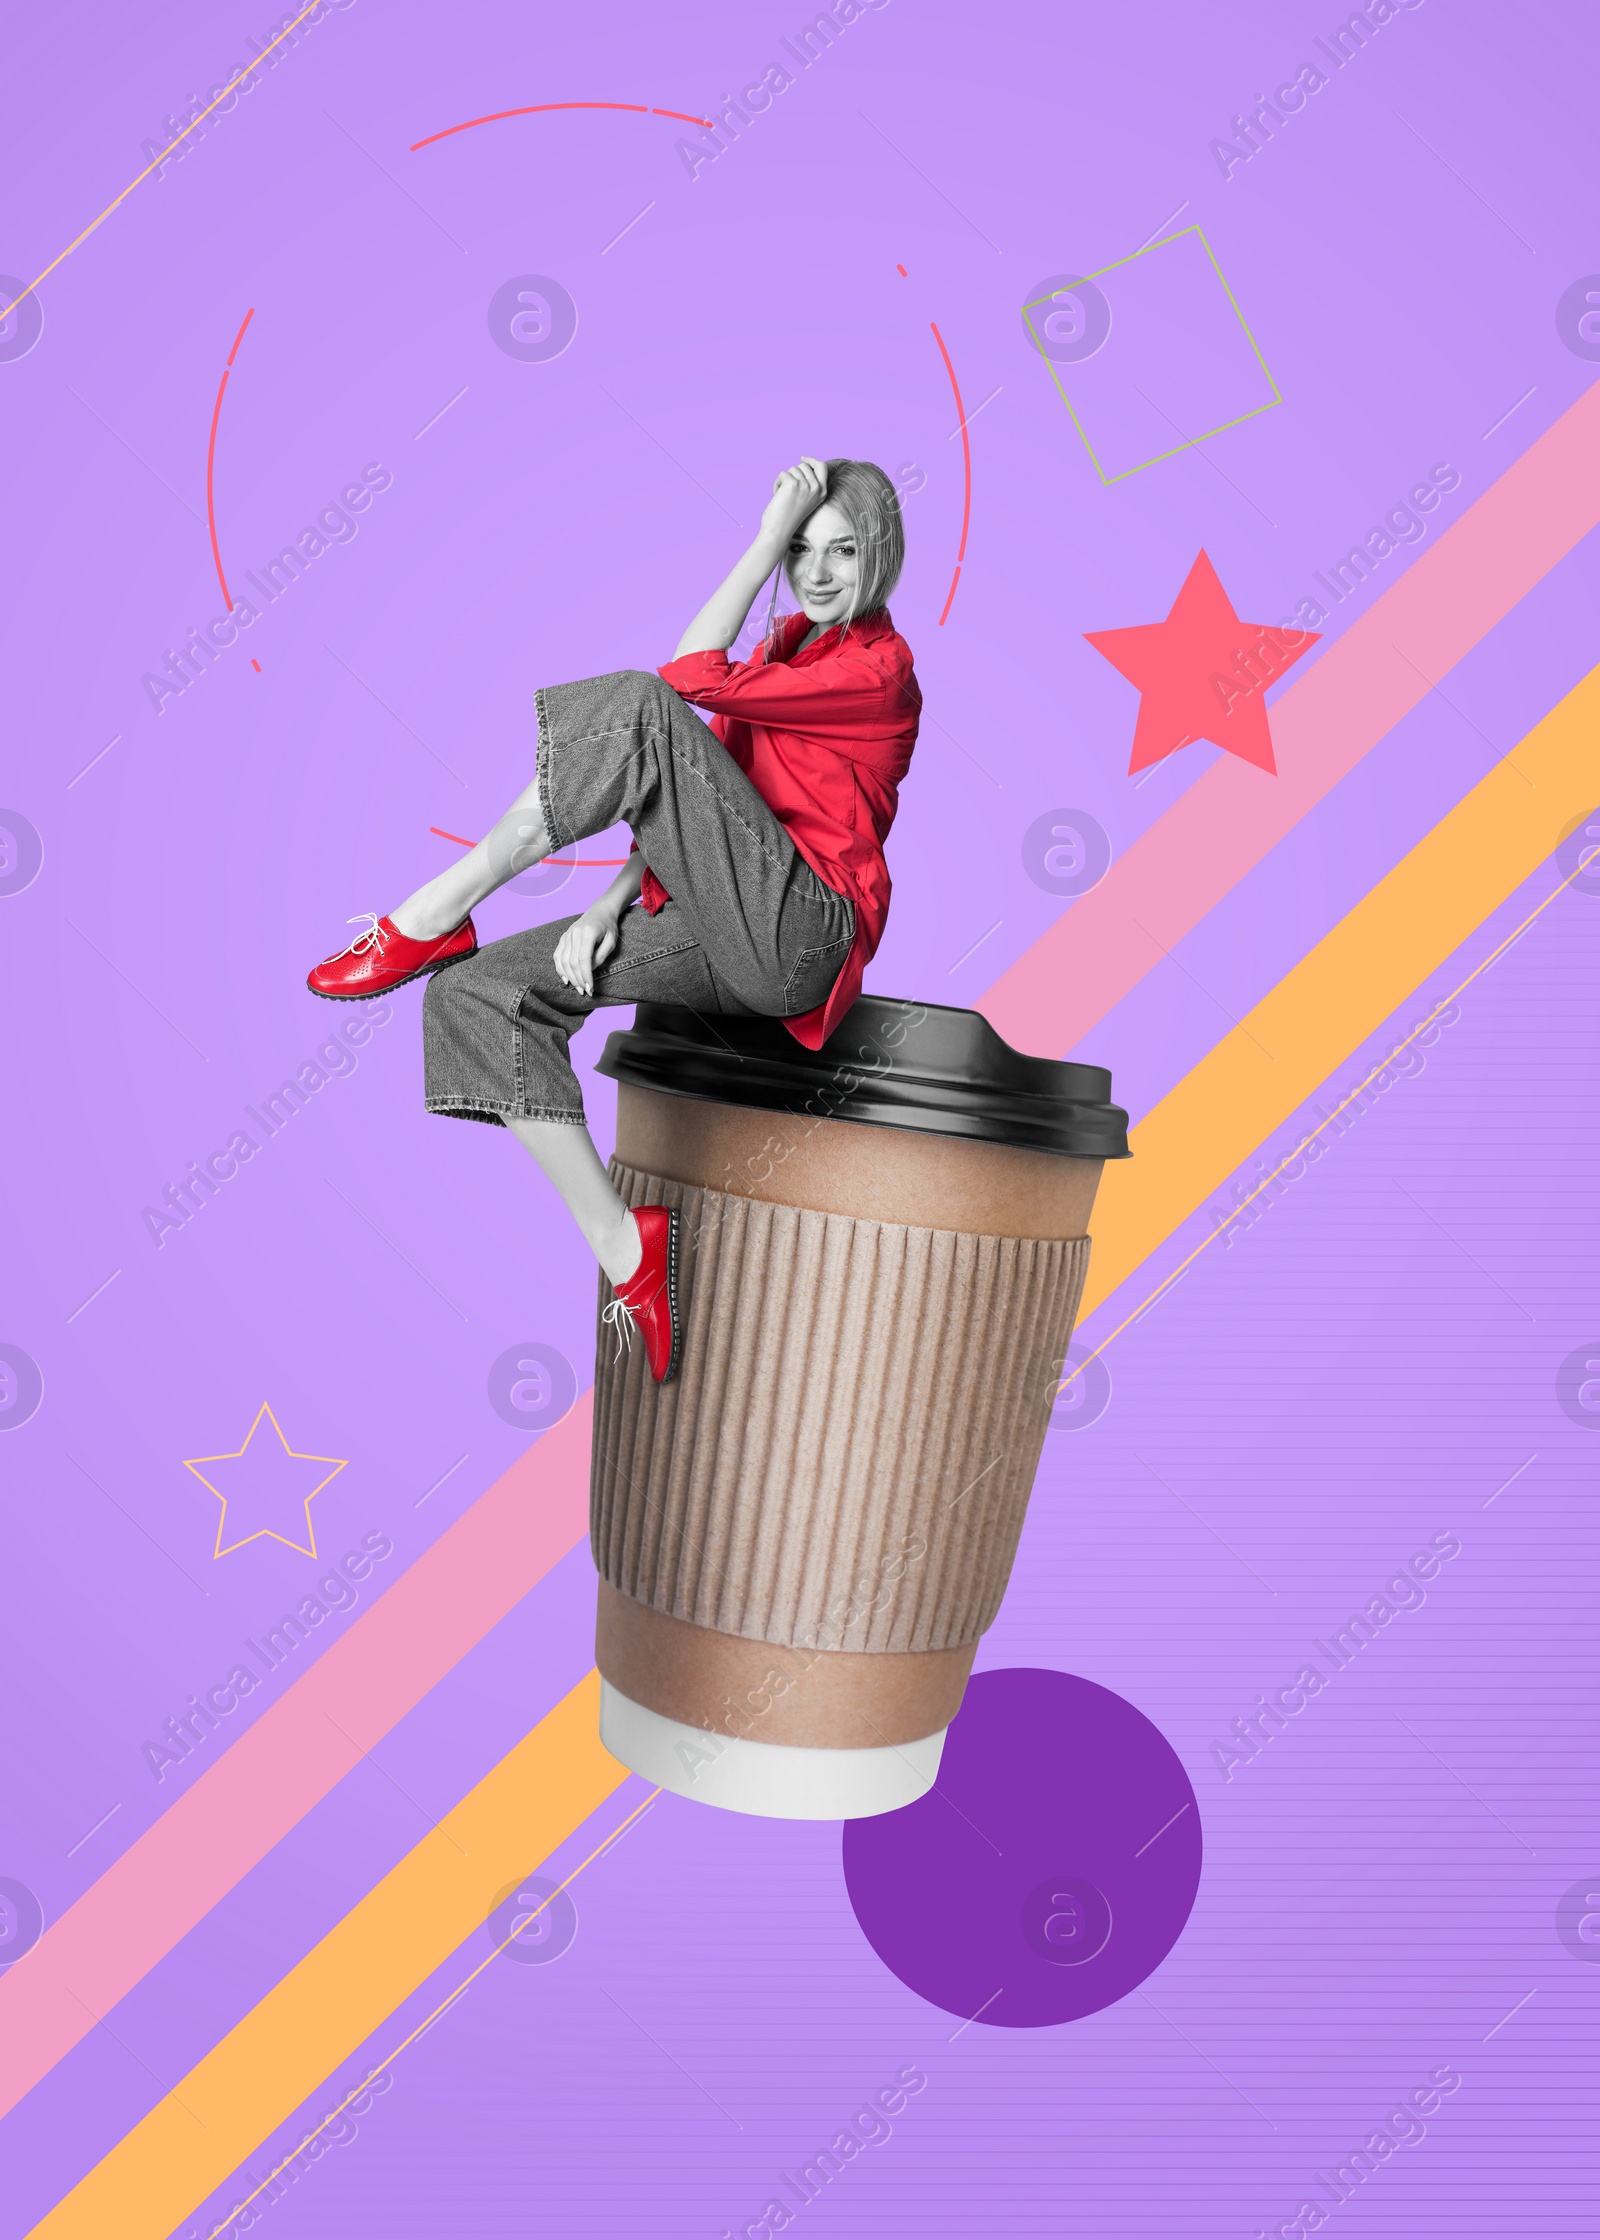 Image of Coffee to go. Woman sitting on takeaway paper cup on violet background, stylish artwork